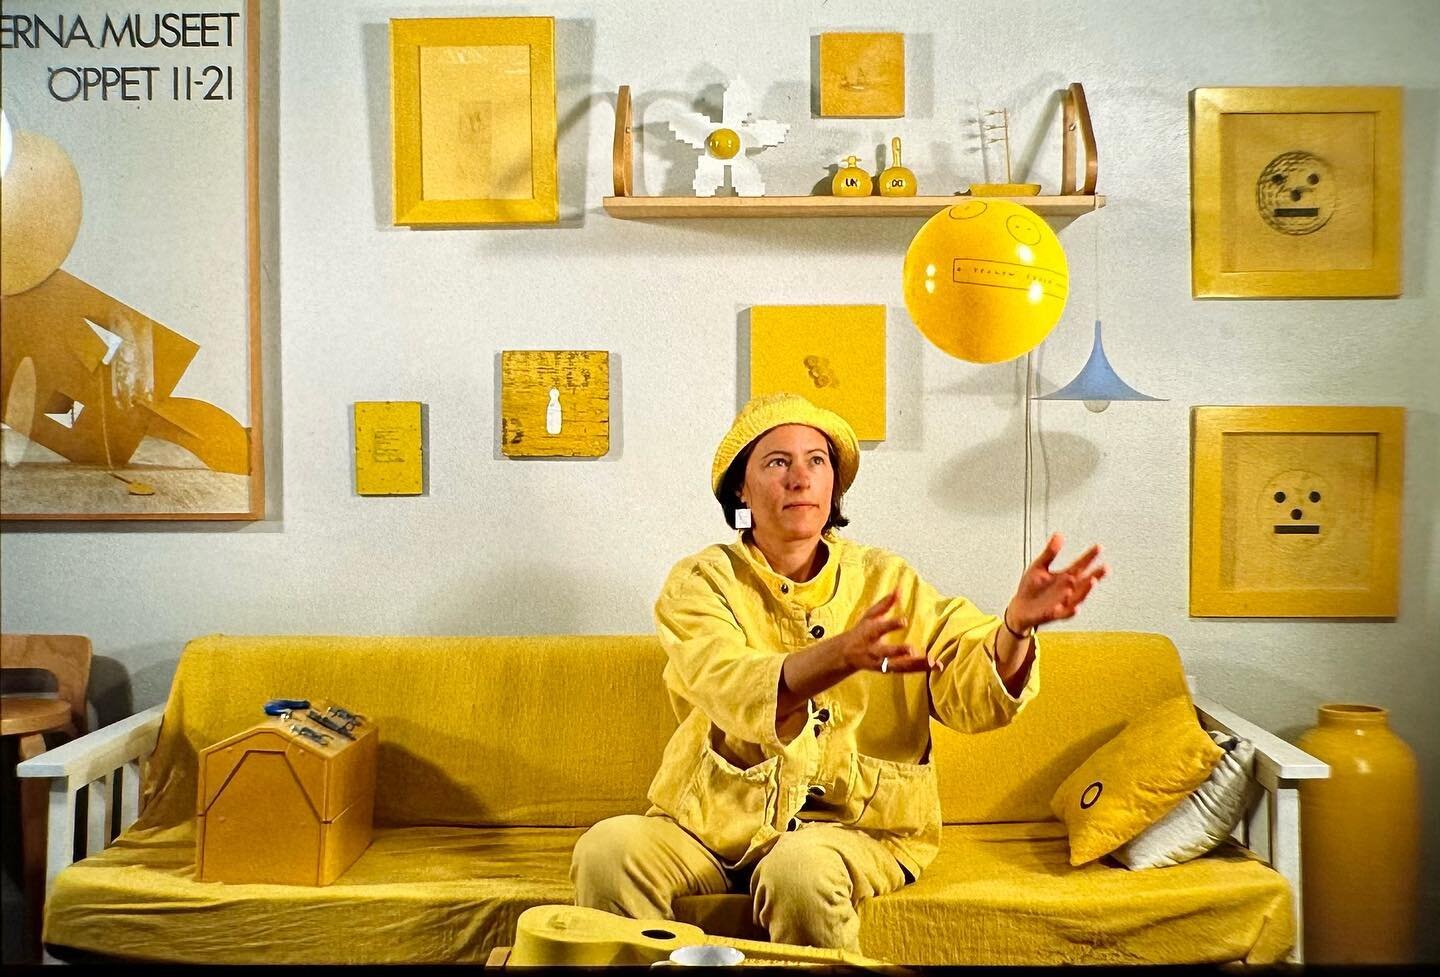 Nancy Monk
in her yellow period, 1992
Her exhibition, walk + wood closes today at 5:30pm.
@nancy_monk